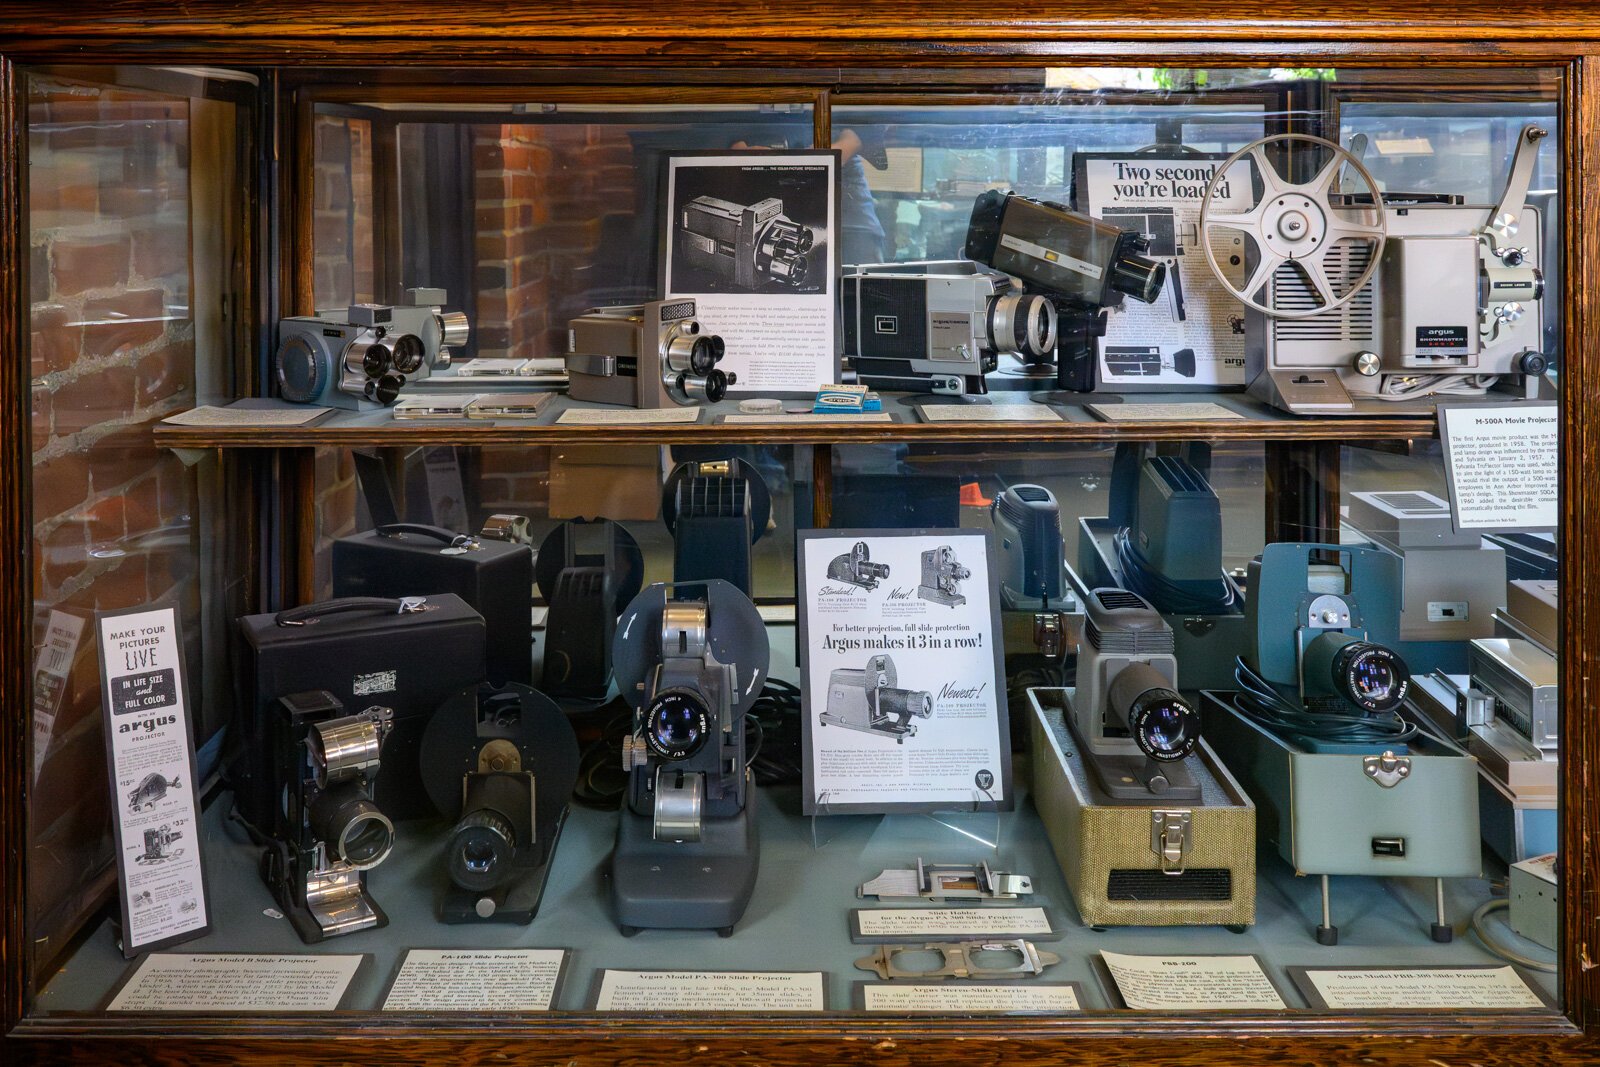 Argus movie cameras, flim projectors, and slide projectors on display at the Argus Museum.